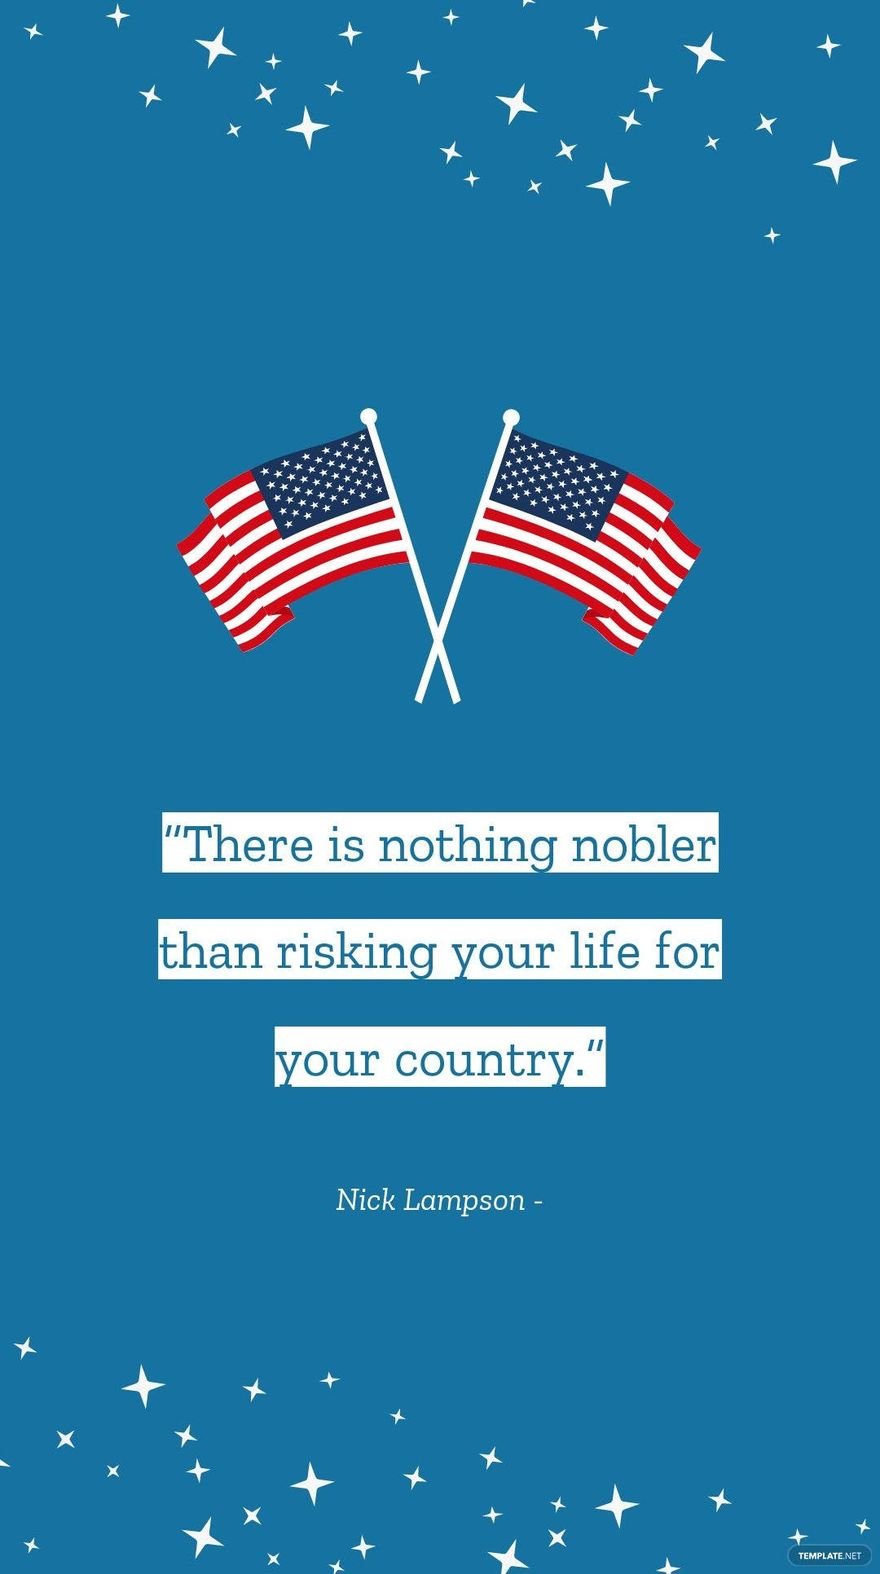 Nick Lampson - “There is nothing nobler than risking your life for your country.”